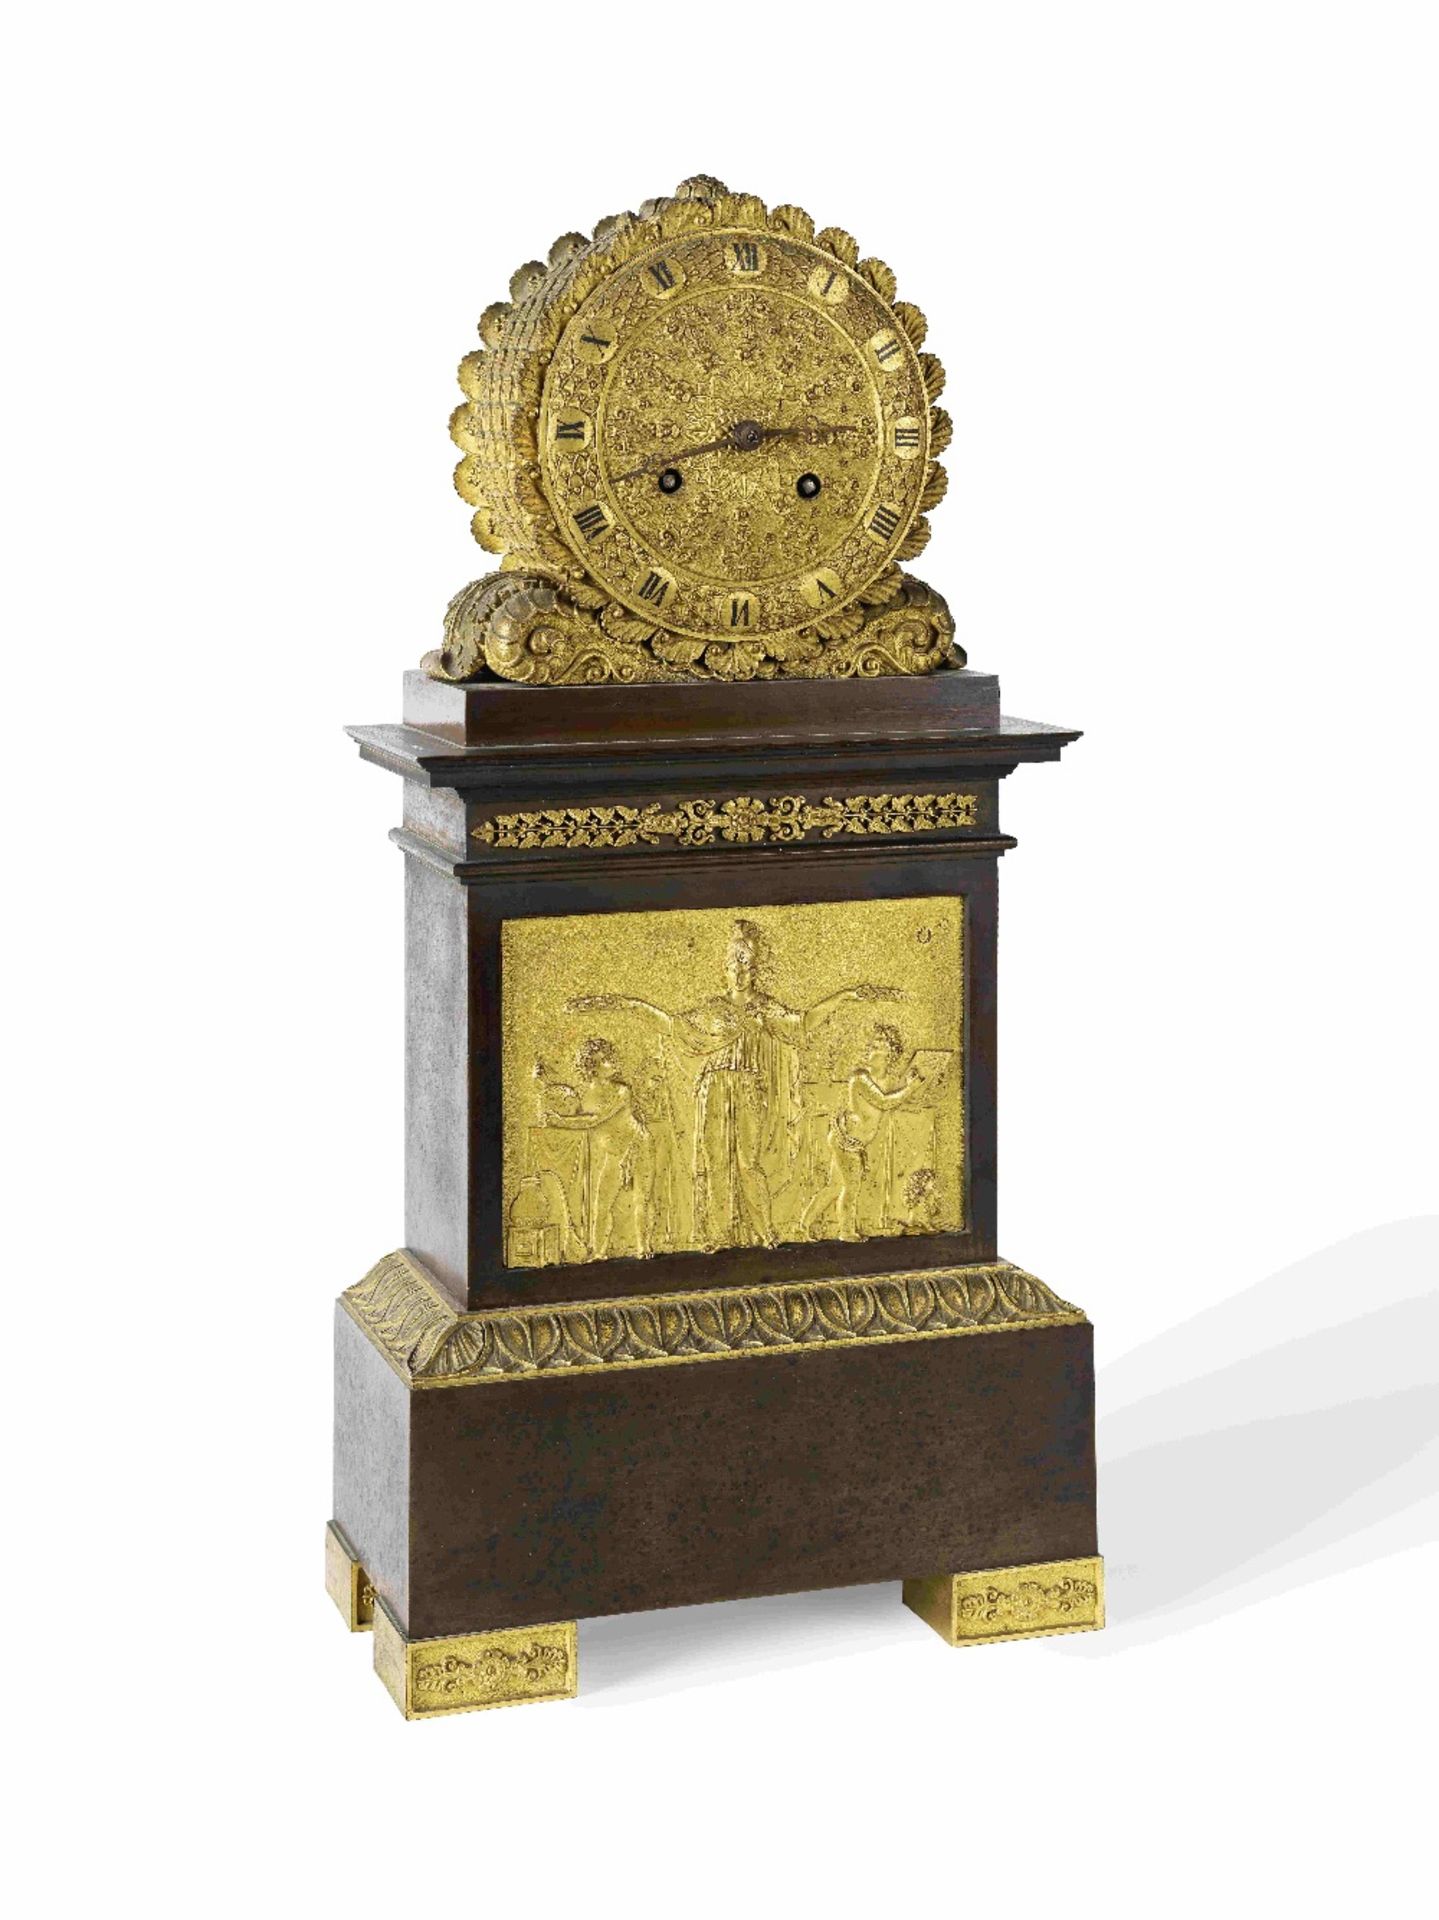 PENDULE CHARLES X EN BRONZE DORE ET BRONZE PATINE VERS 1830A CHARLES X ORMOLU AND PATINATED BRONZ... - Image 2 of 2